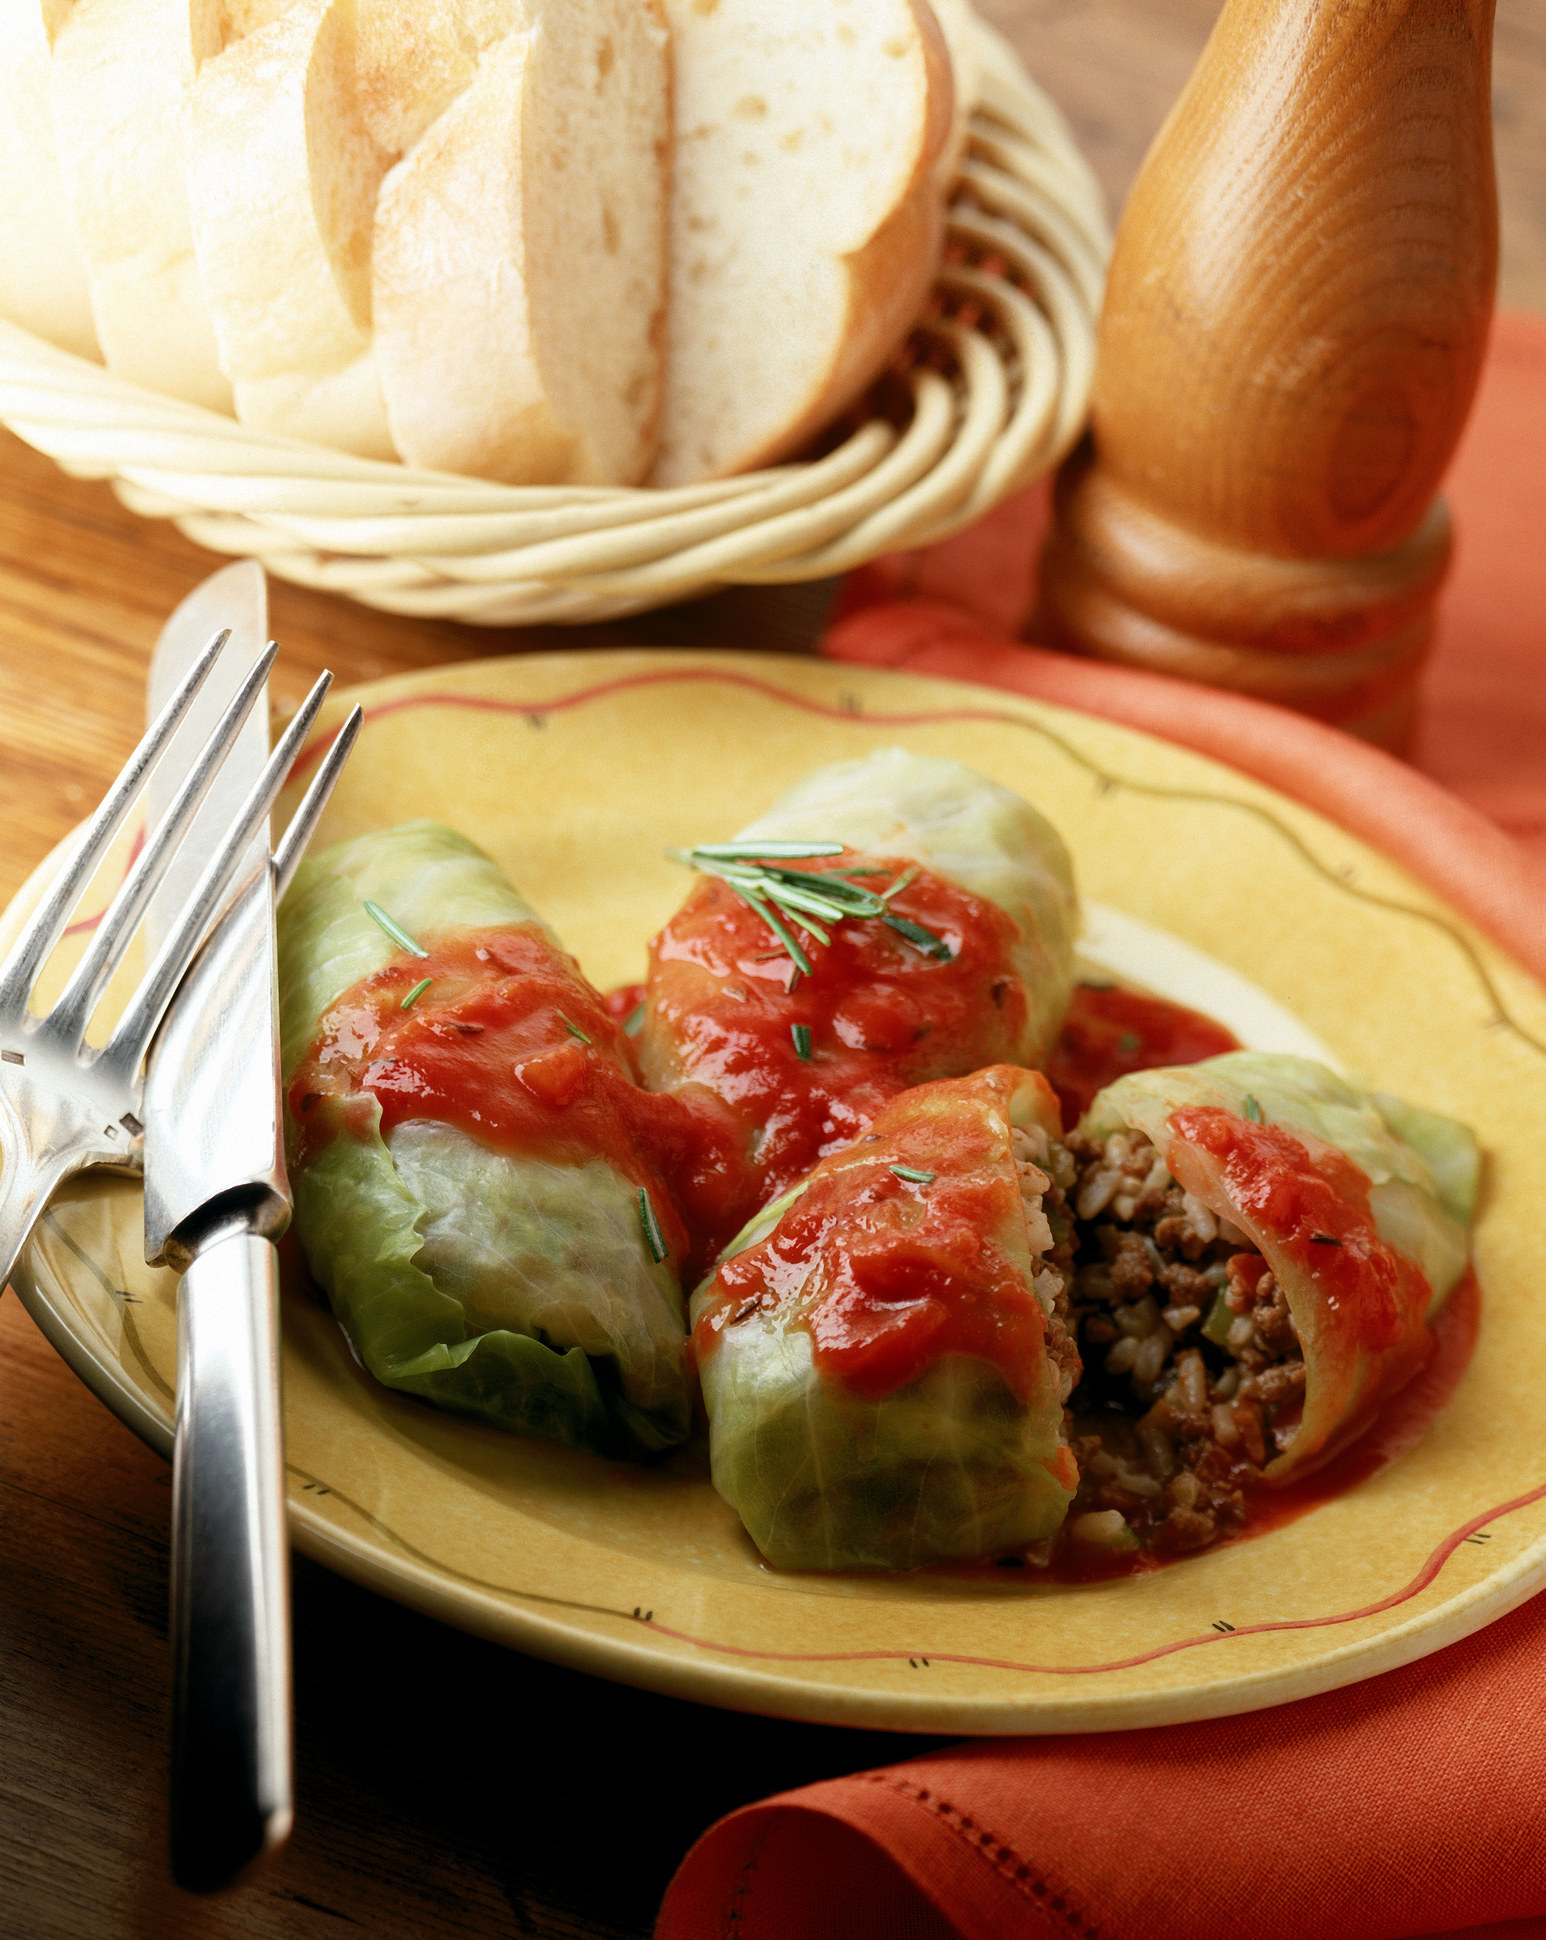 Stuffed cabbage with ground beef